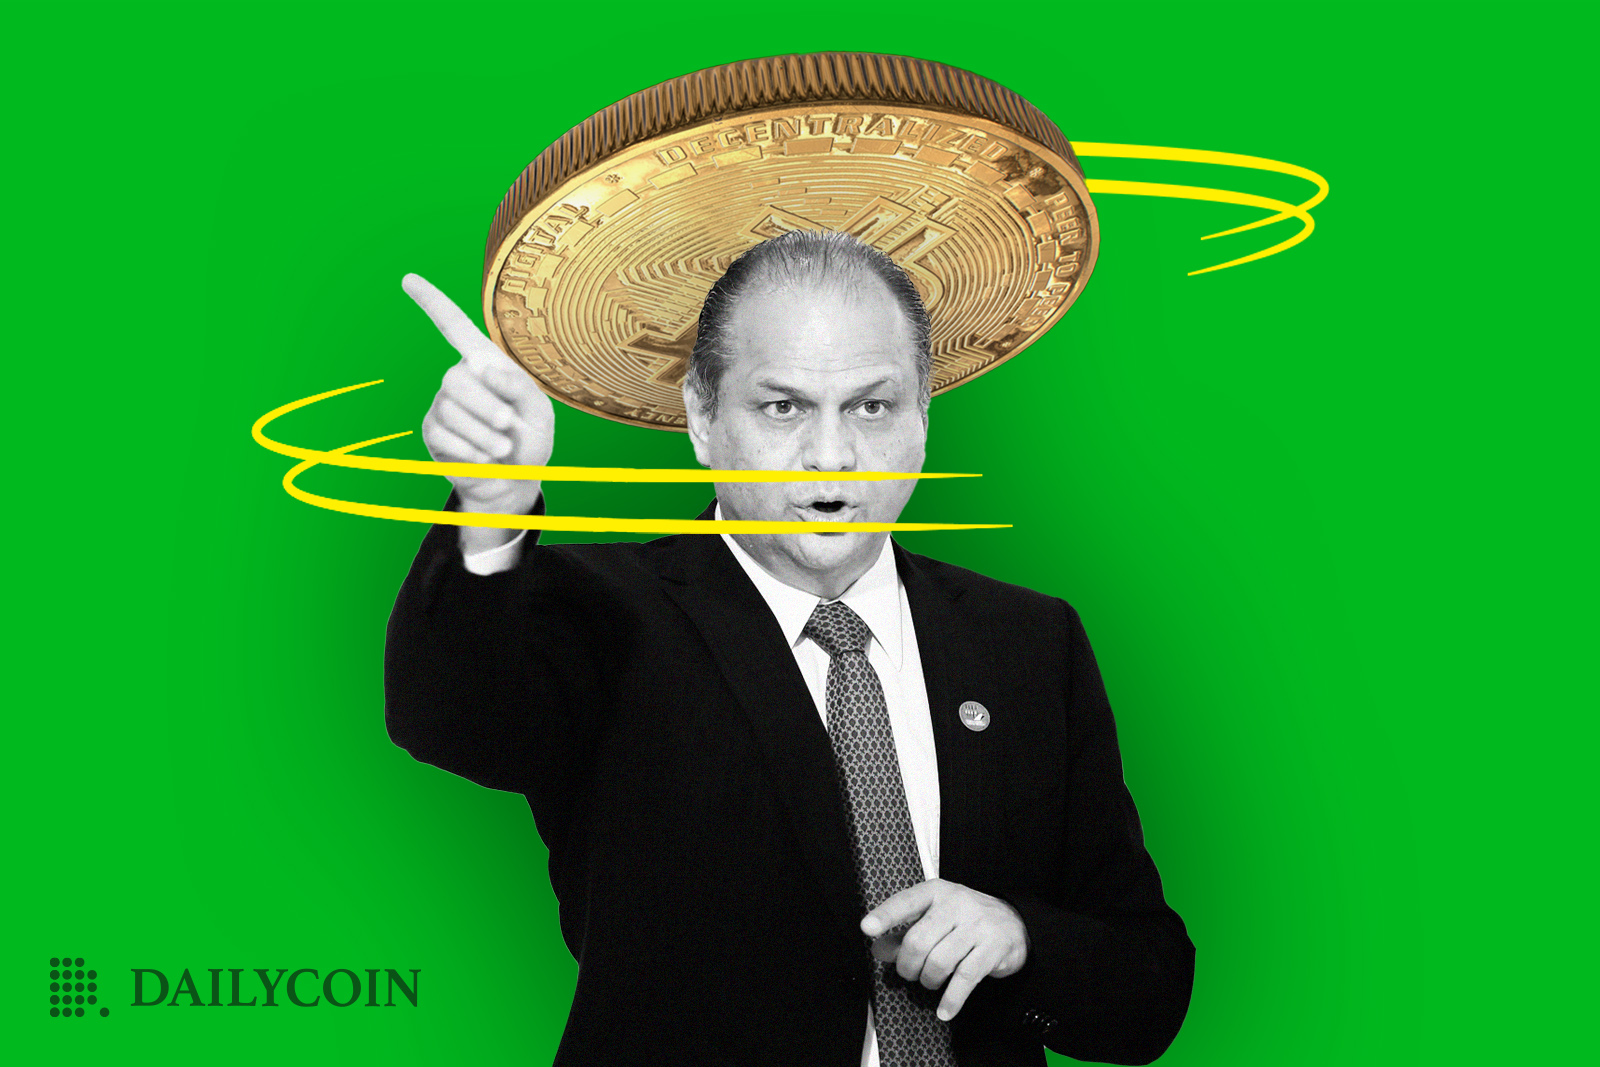 Ricardo Barro with spinning giant bitcoin on head pointing